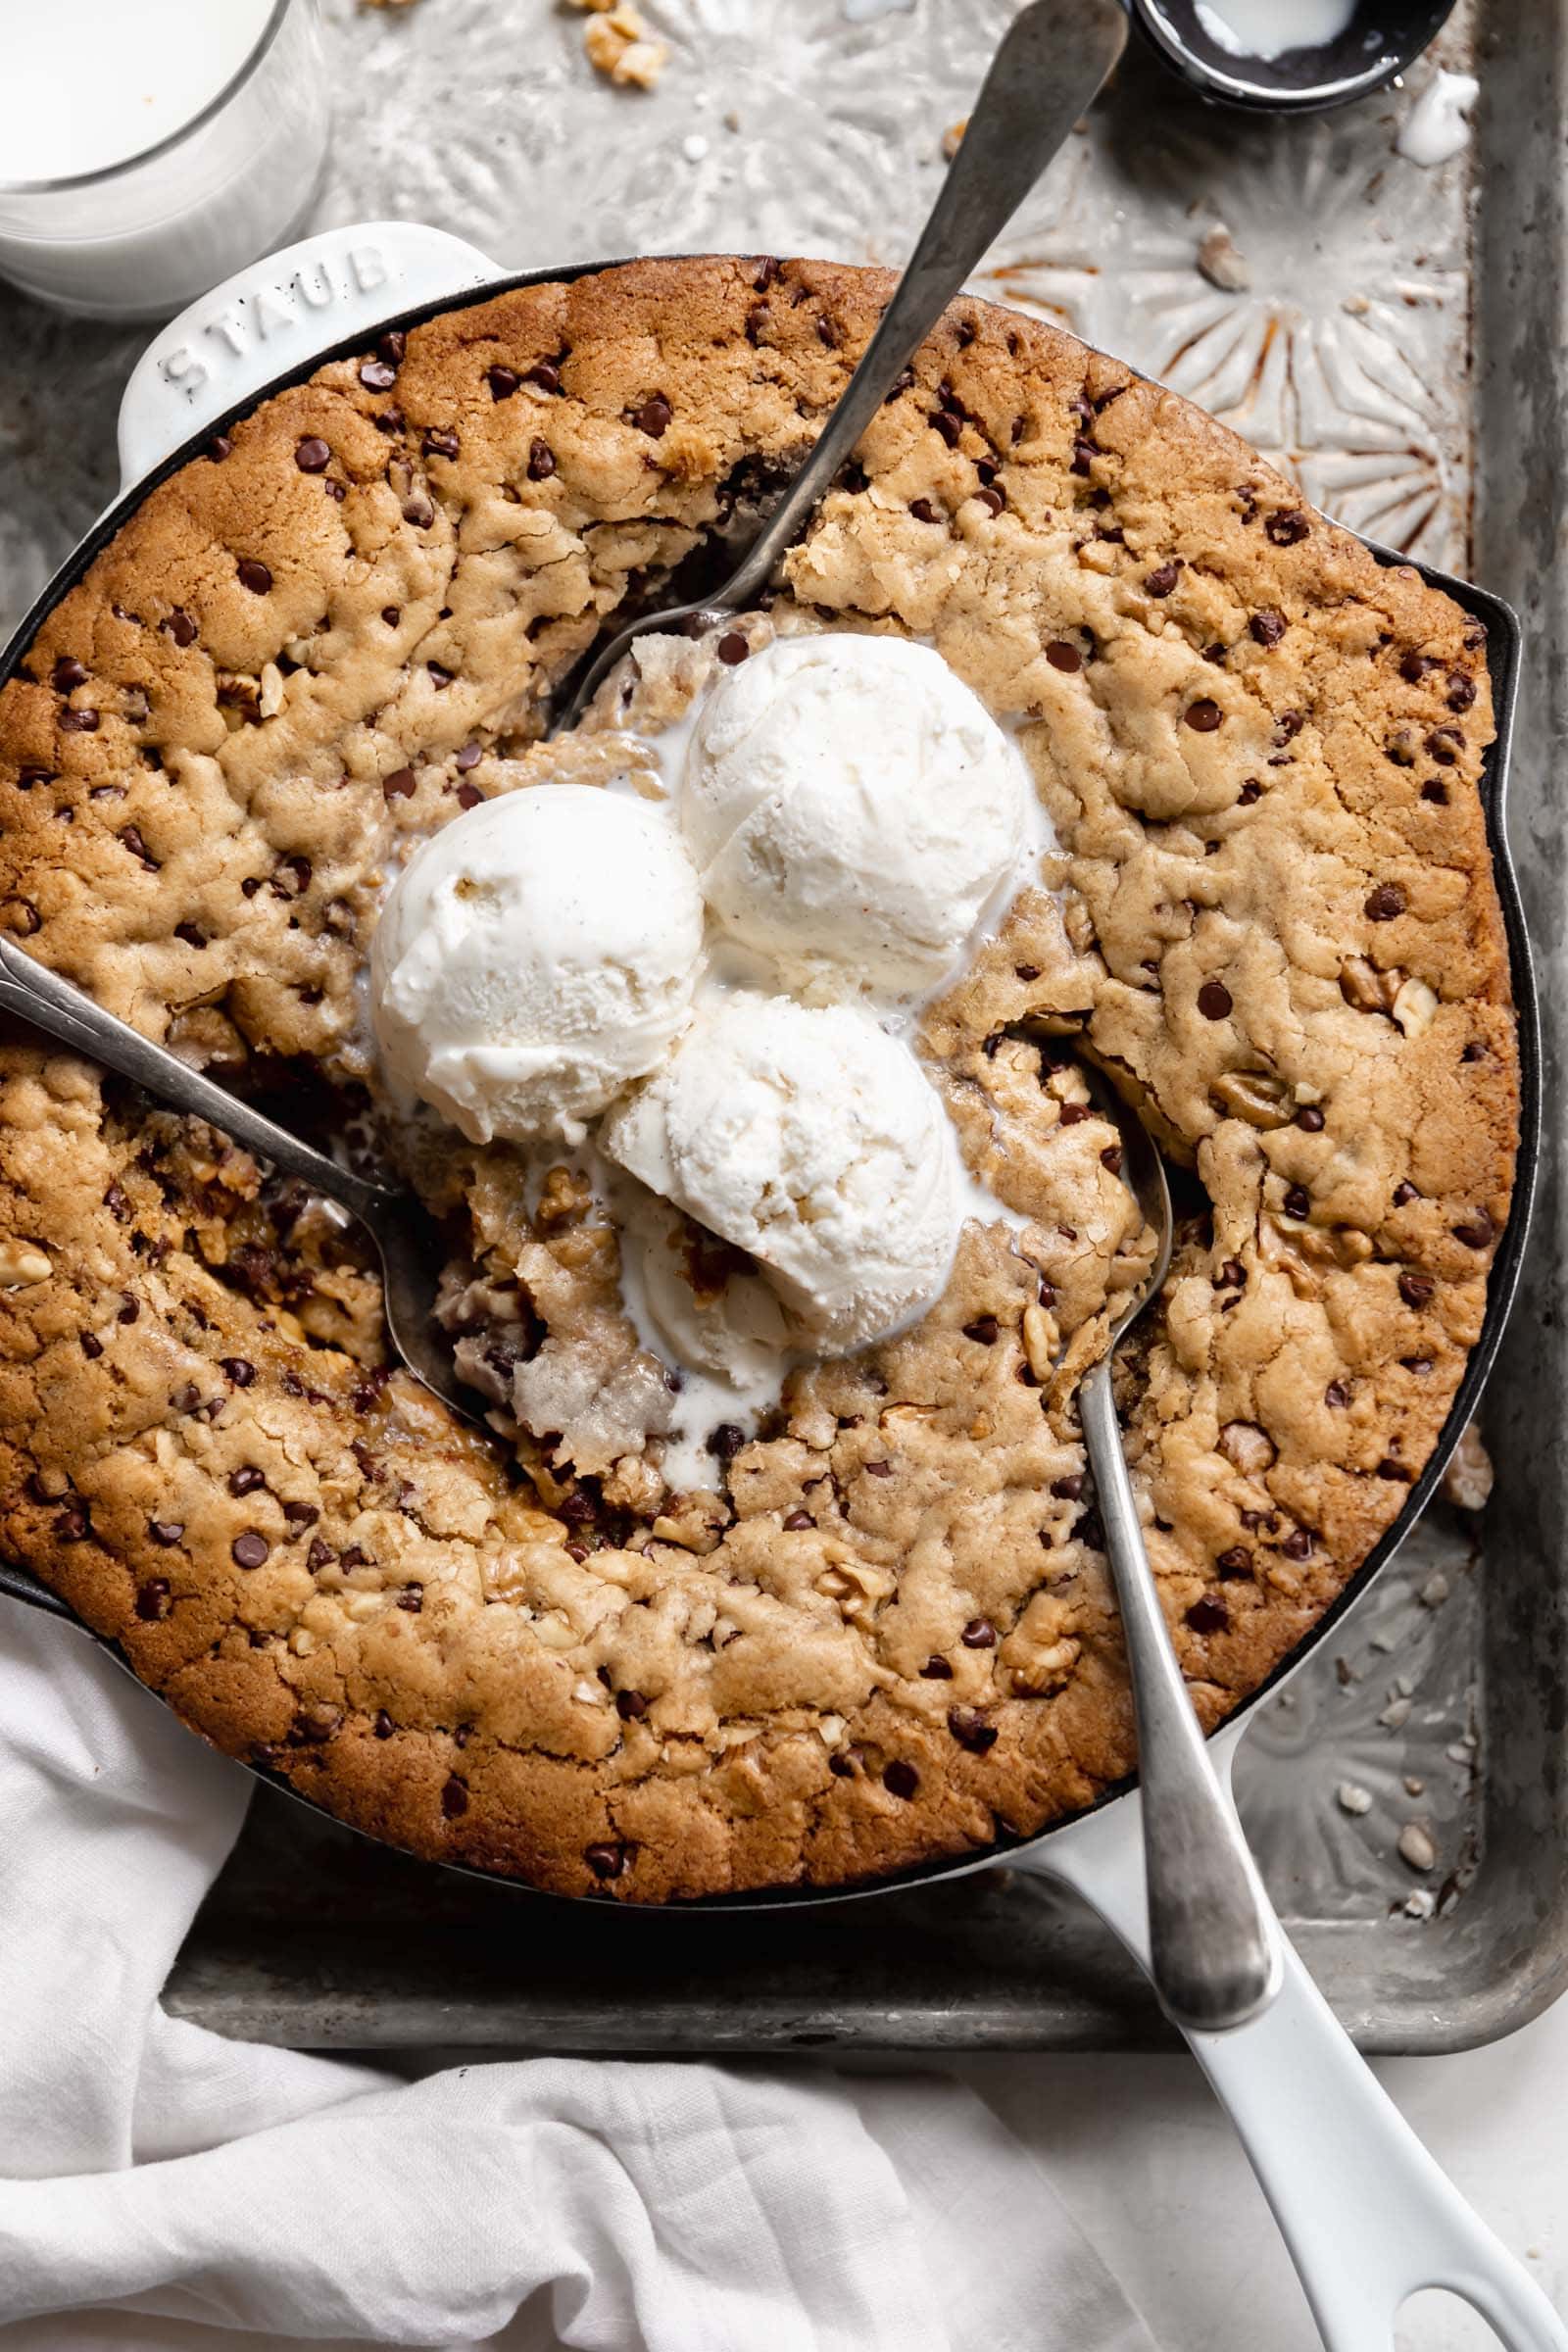 https://bromabakery.com/wp-content/uploads/2021/06/Chocolate-Chip-Cookie-Skillet-4.jpg